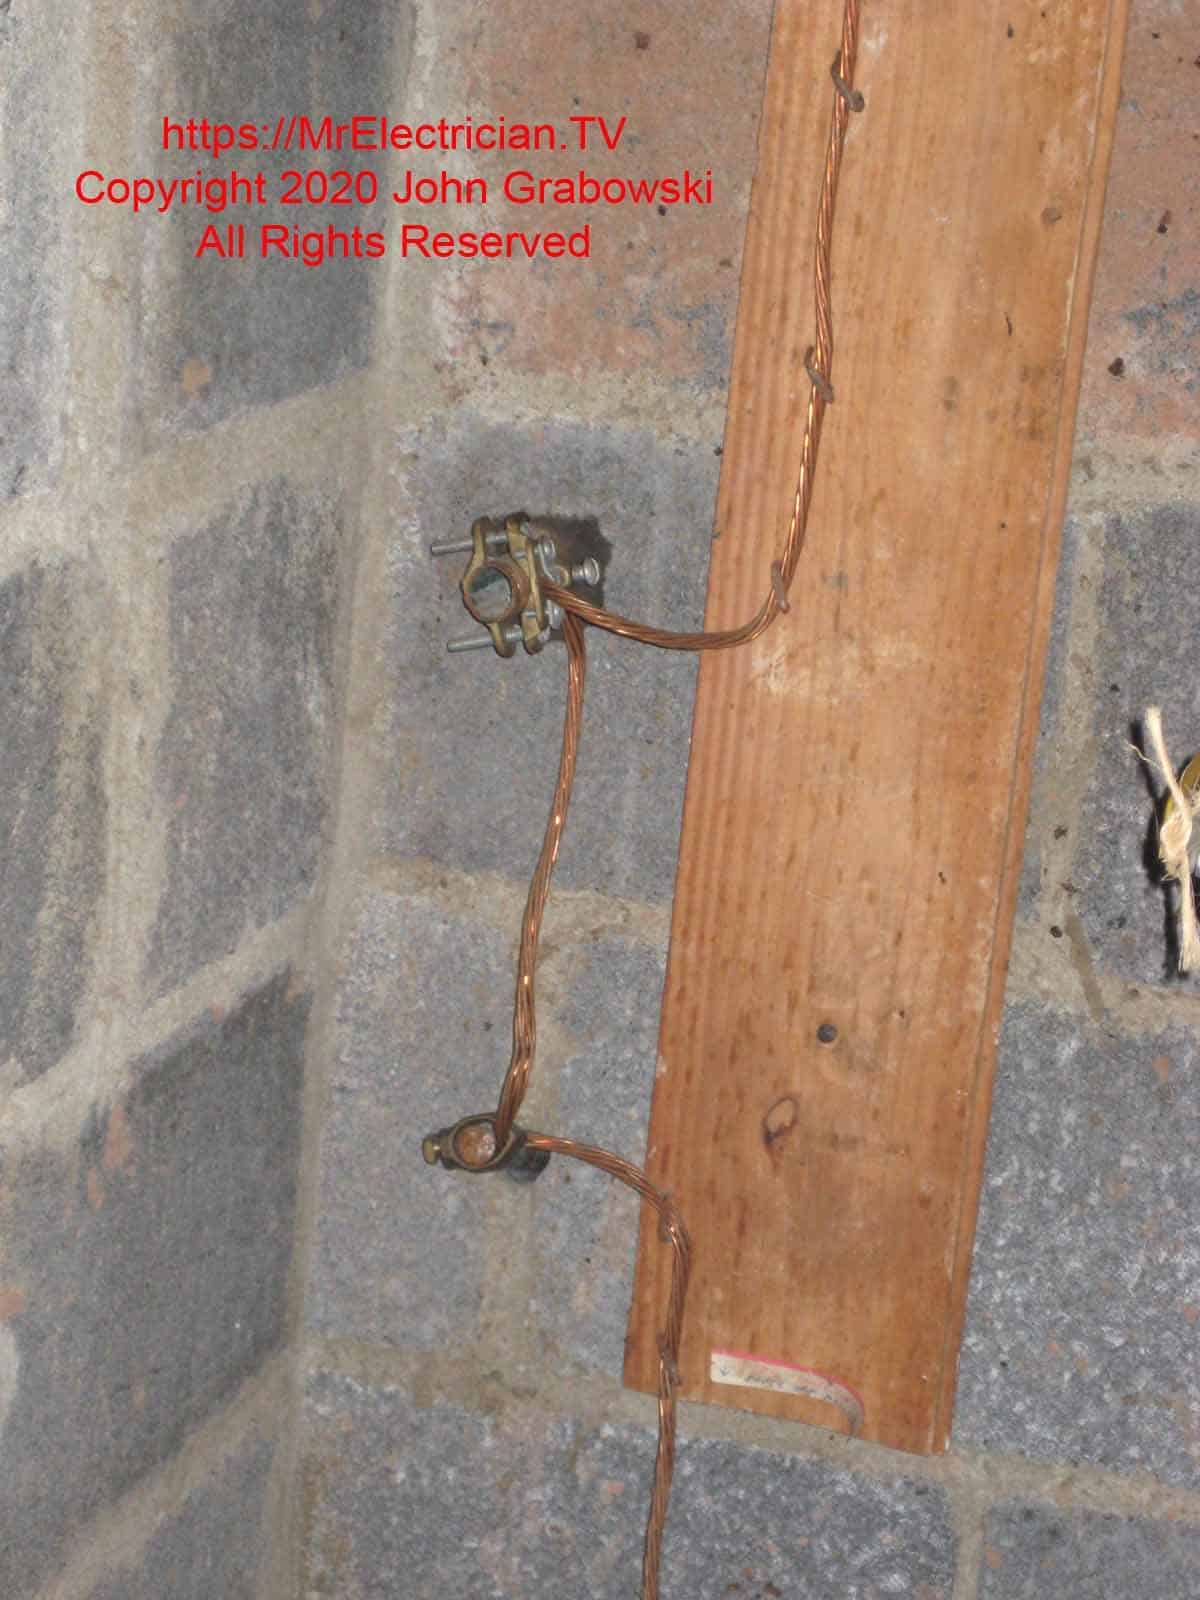 Installation of a ground rod through a basement wall with the grounding electrode conductor also connected to the nearby old water service pipe